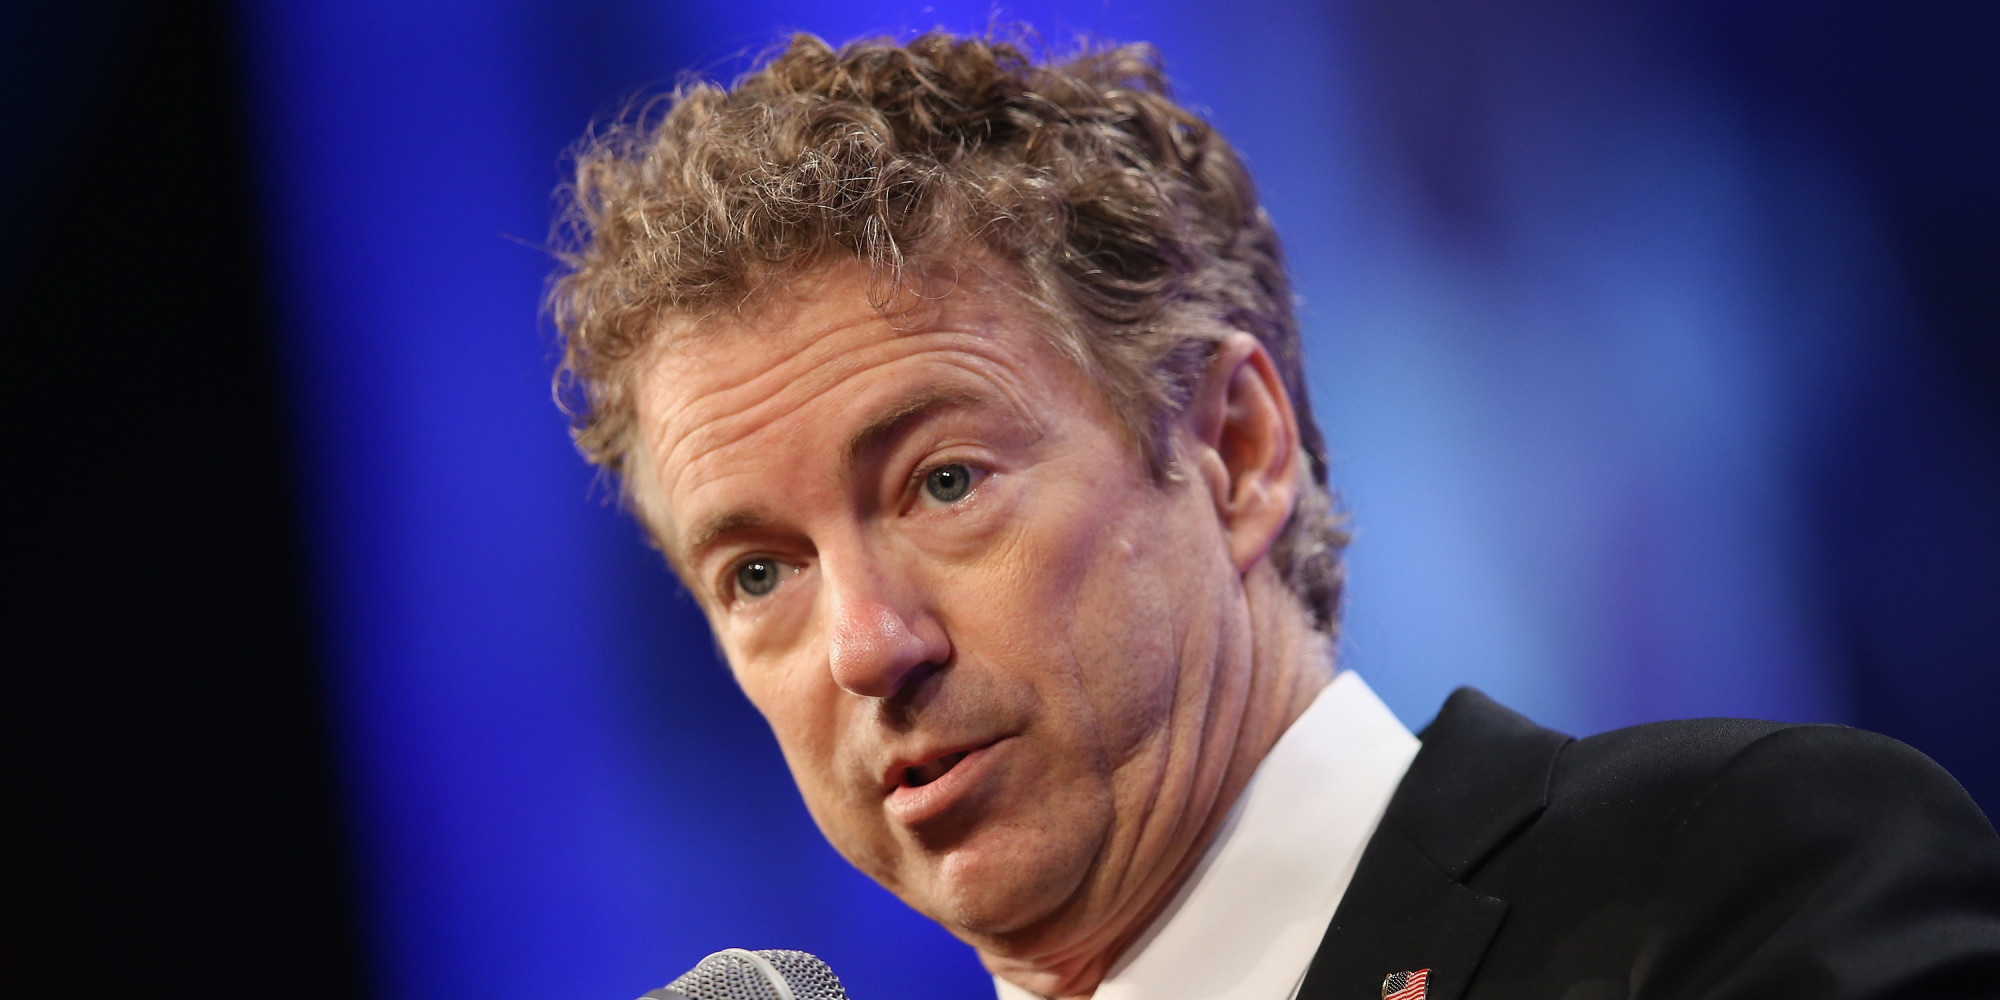 You know Rand Paul DOES kind of look like a lizard if you really look at him.